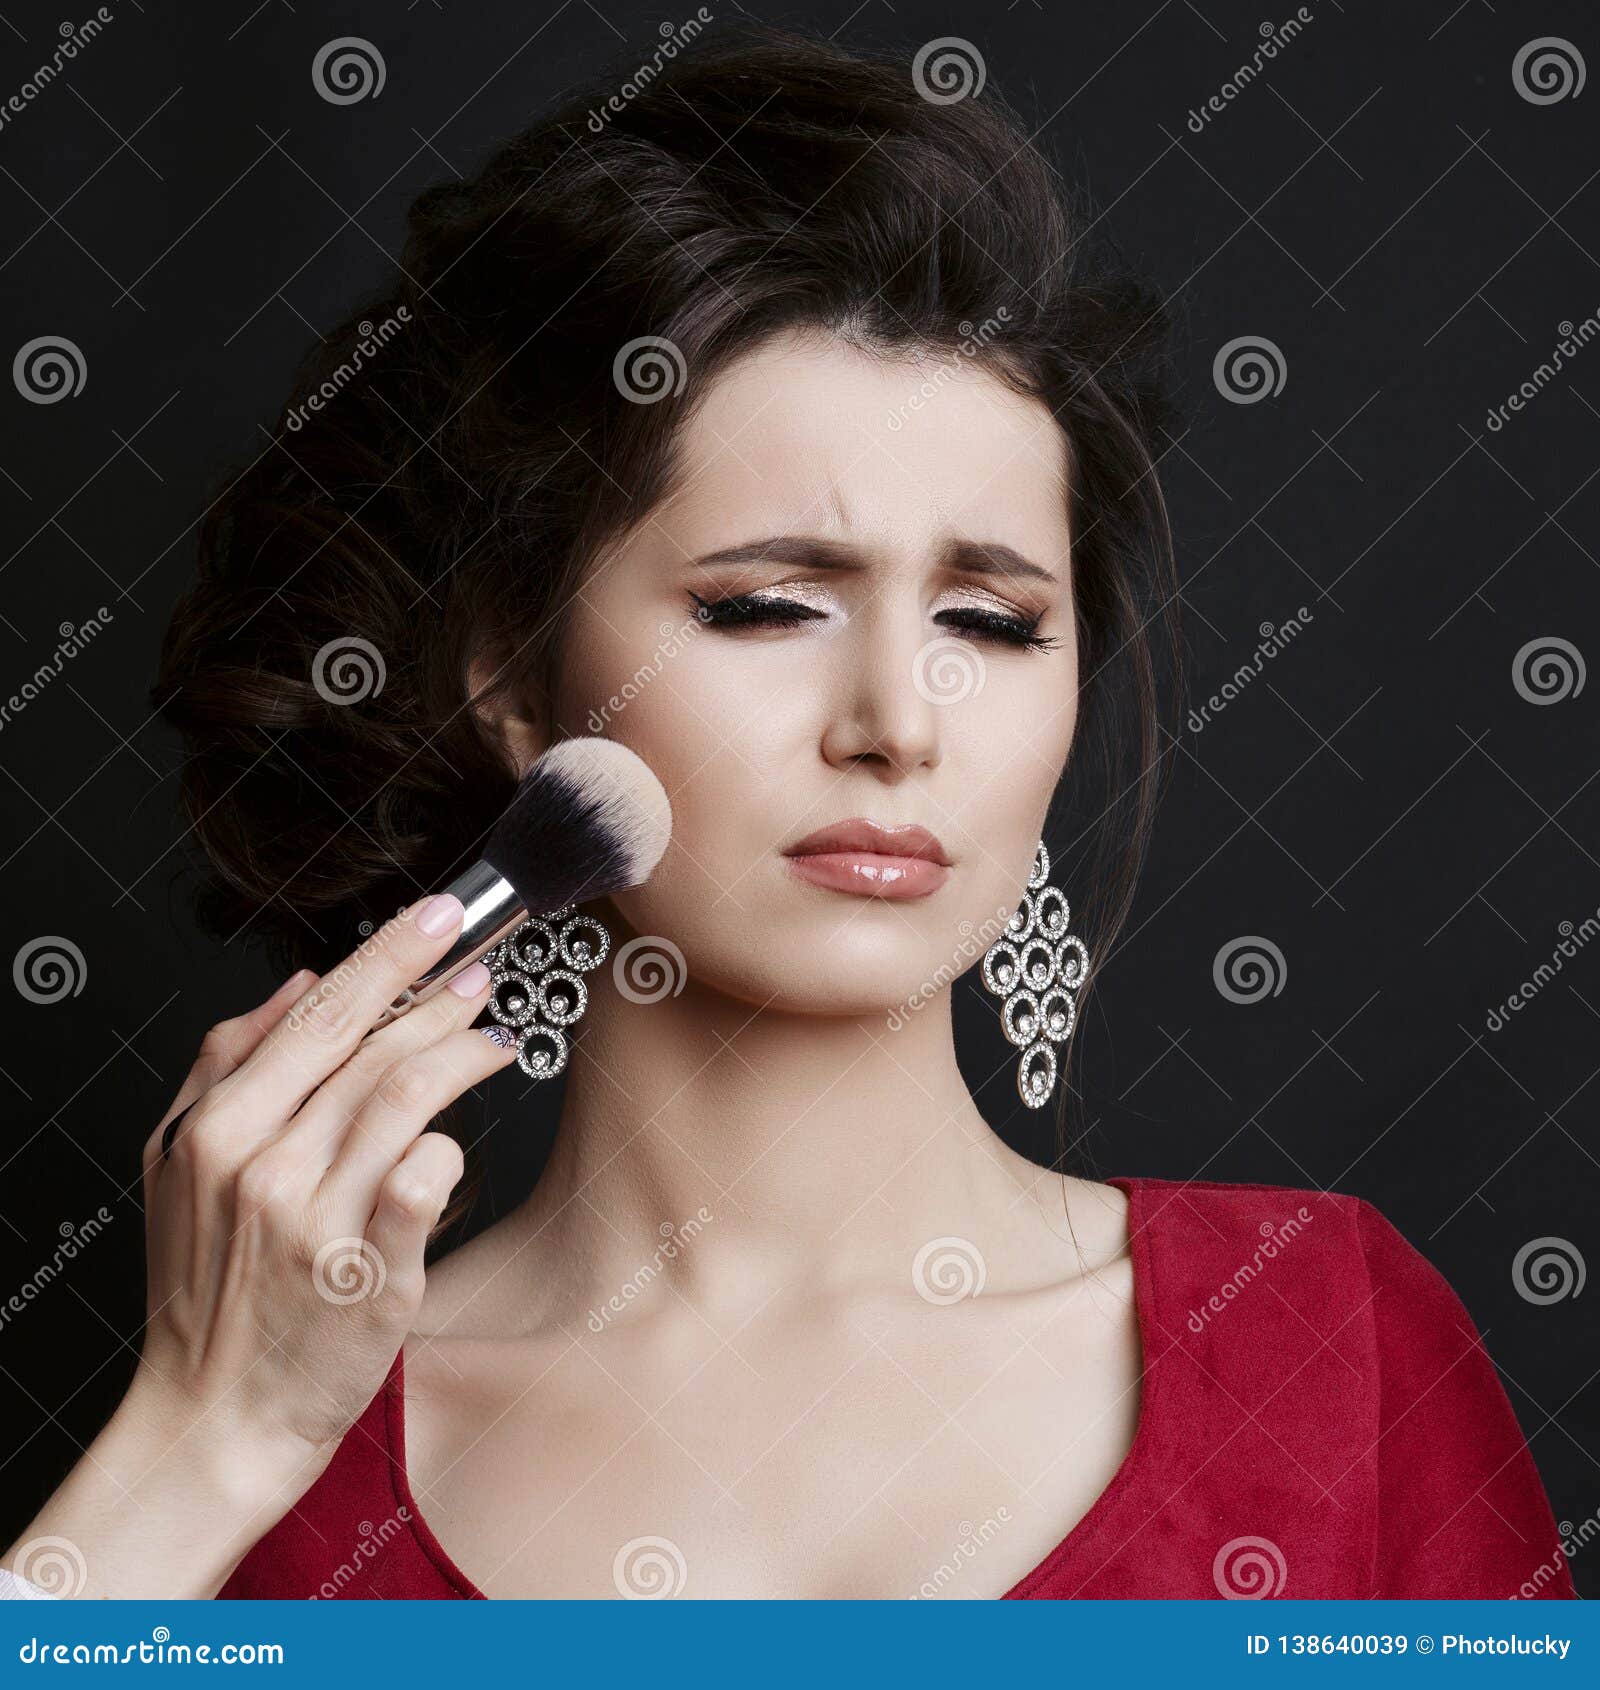 makeup on cheekbone with for capricious brunette girl.